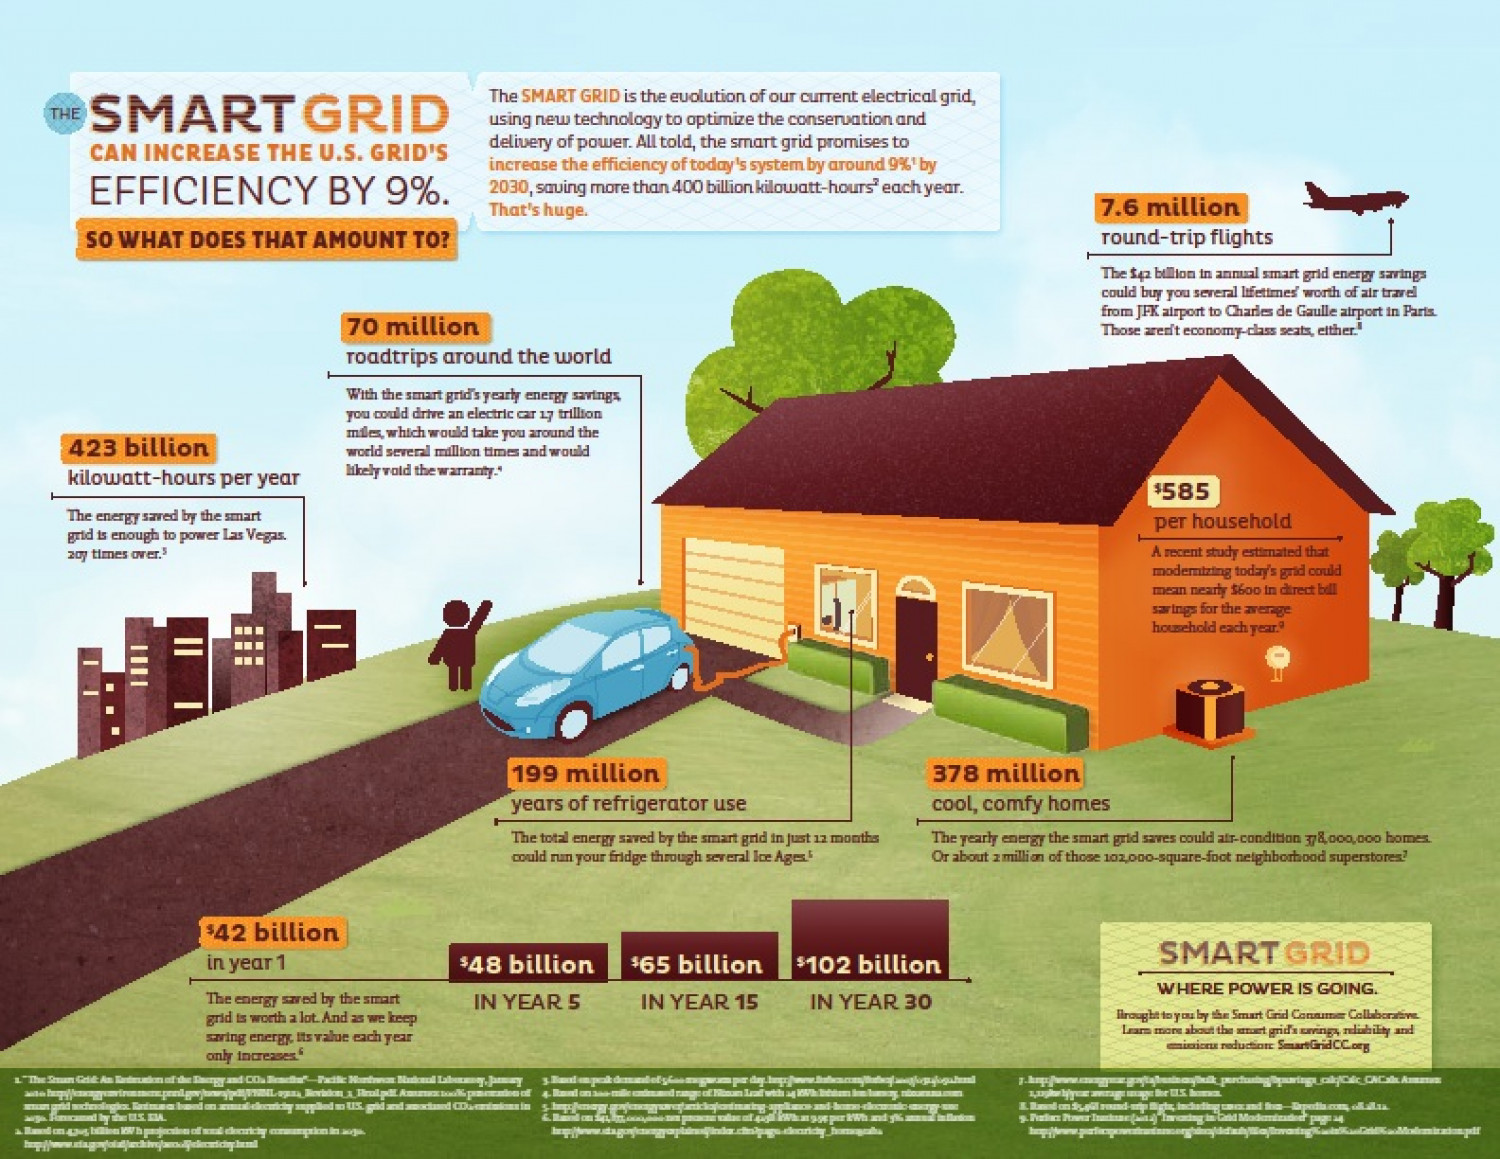 Smart Grid: Where Power is Going Infographic